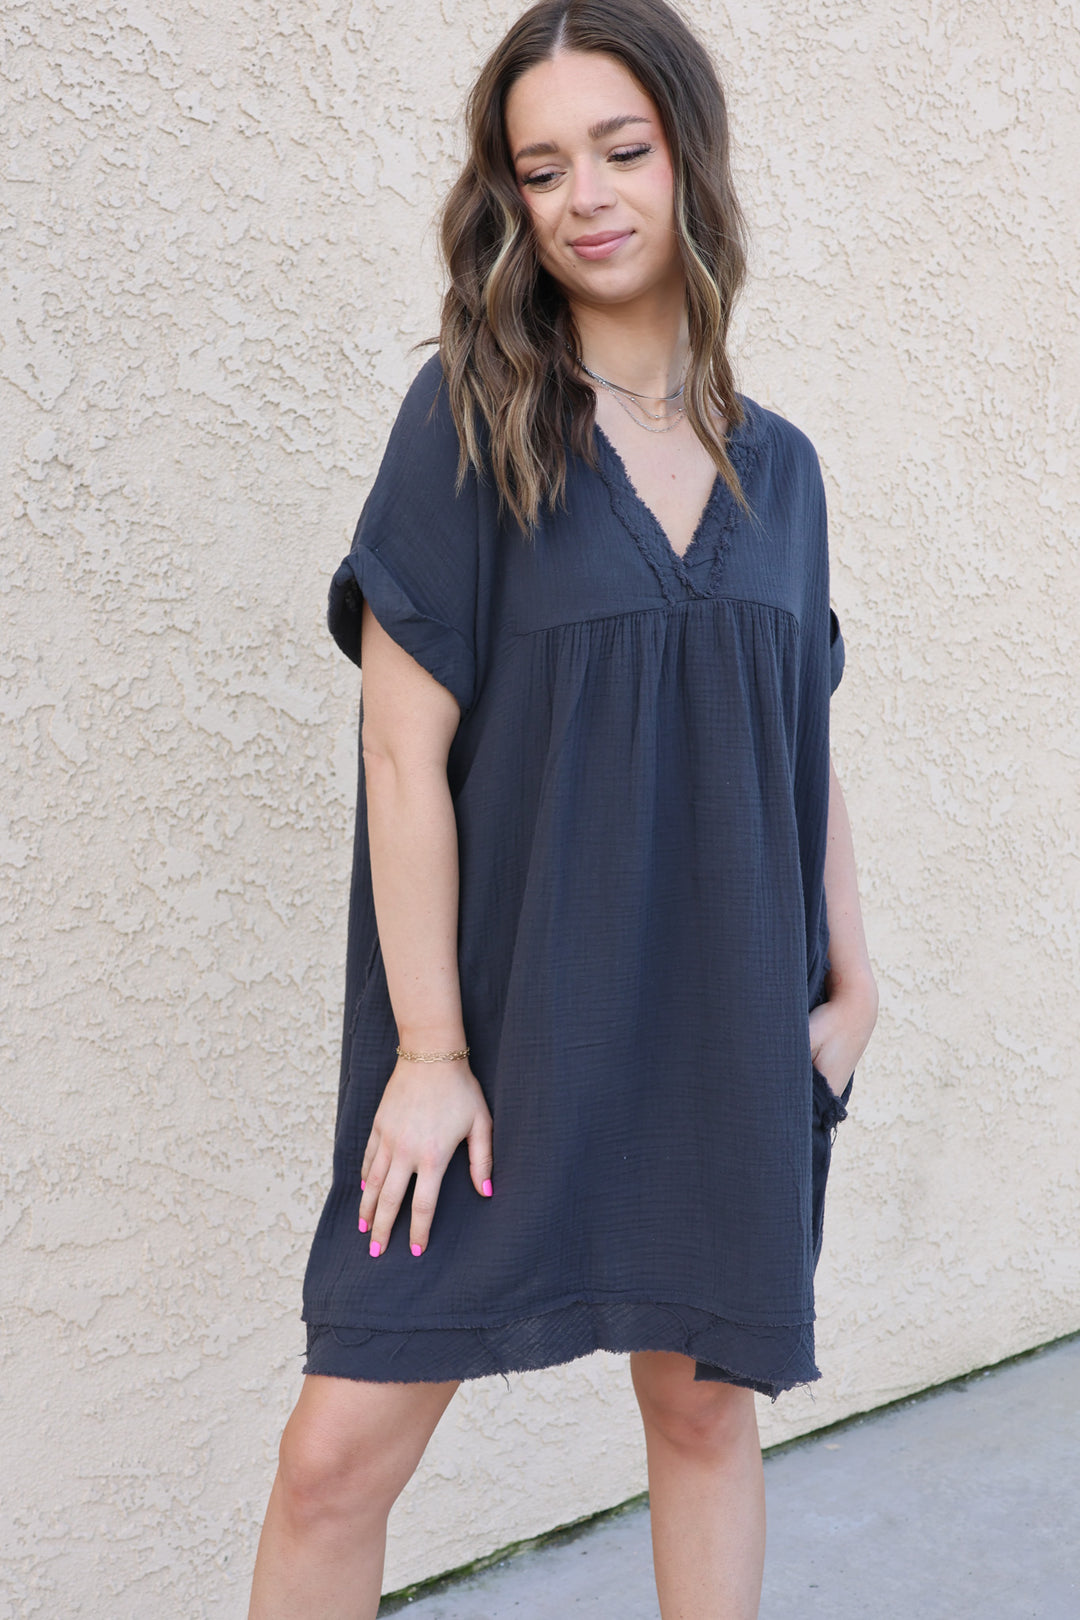 Casually Chic Dress in Grey - ShopSpoiled